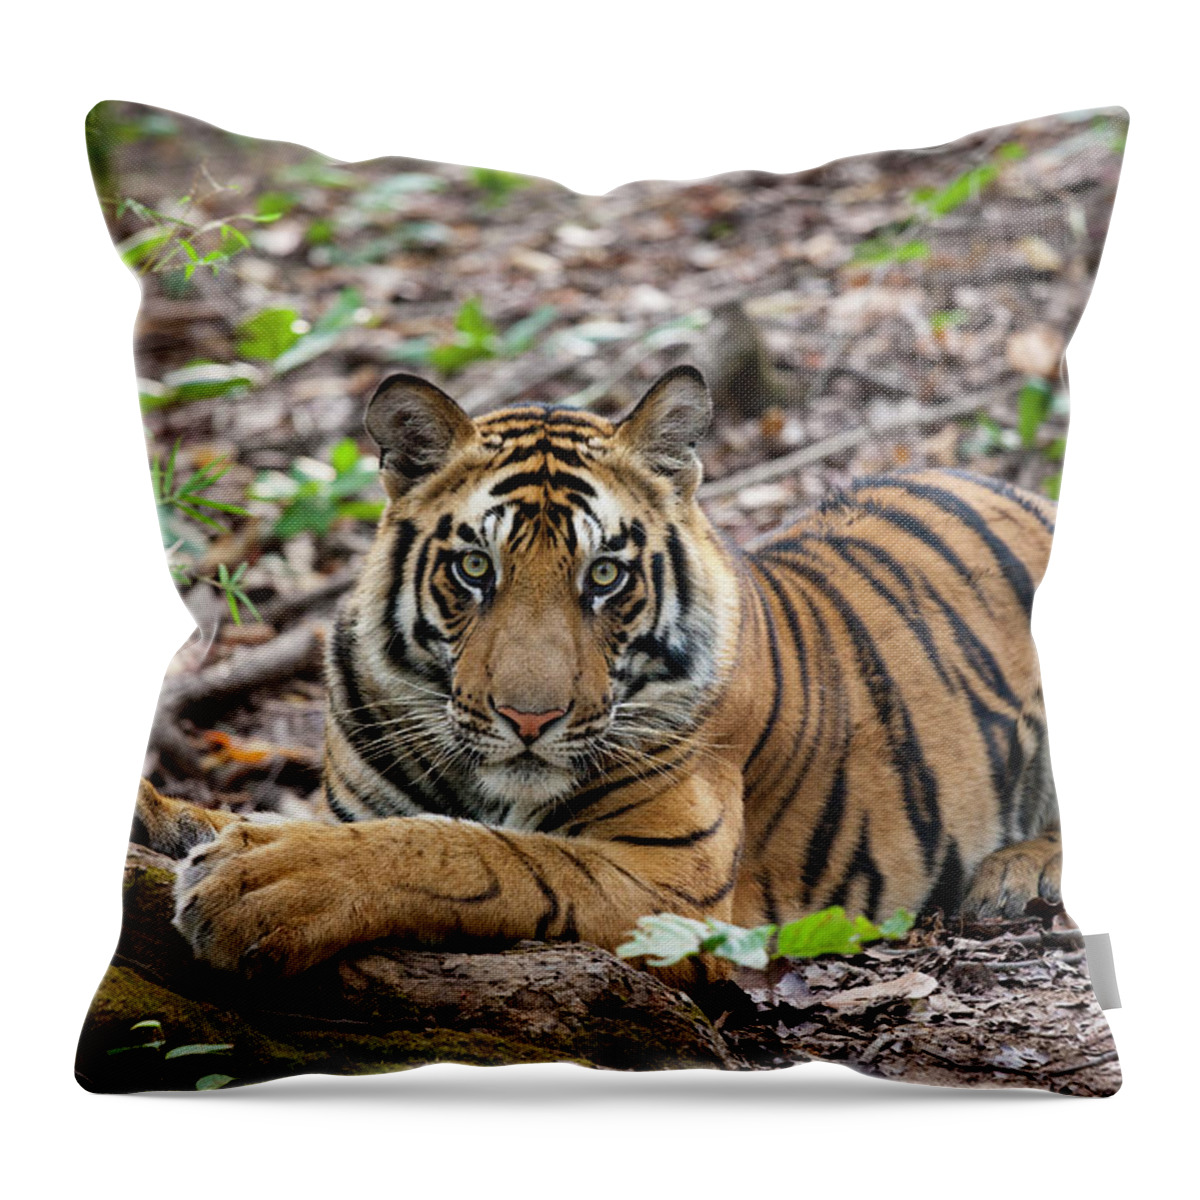 Looking Around Throw Pillow featuring the photograph An Adult Tiger In Bandhavgarh National by Mint Images - Art Wolfe